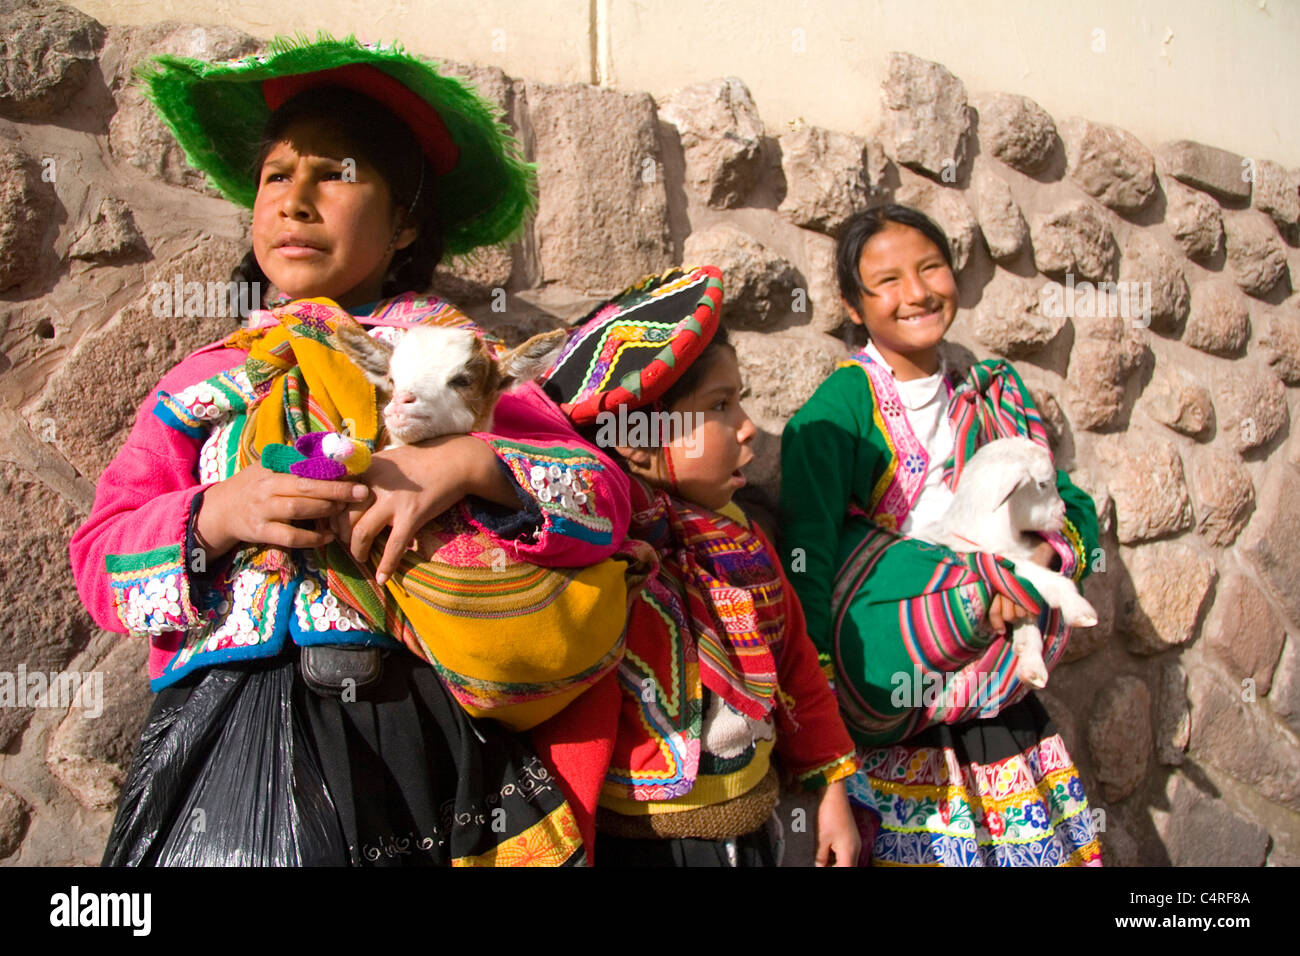 Colorful traditional clothing of local girls, Cusco, Peru, South America Stock Photo